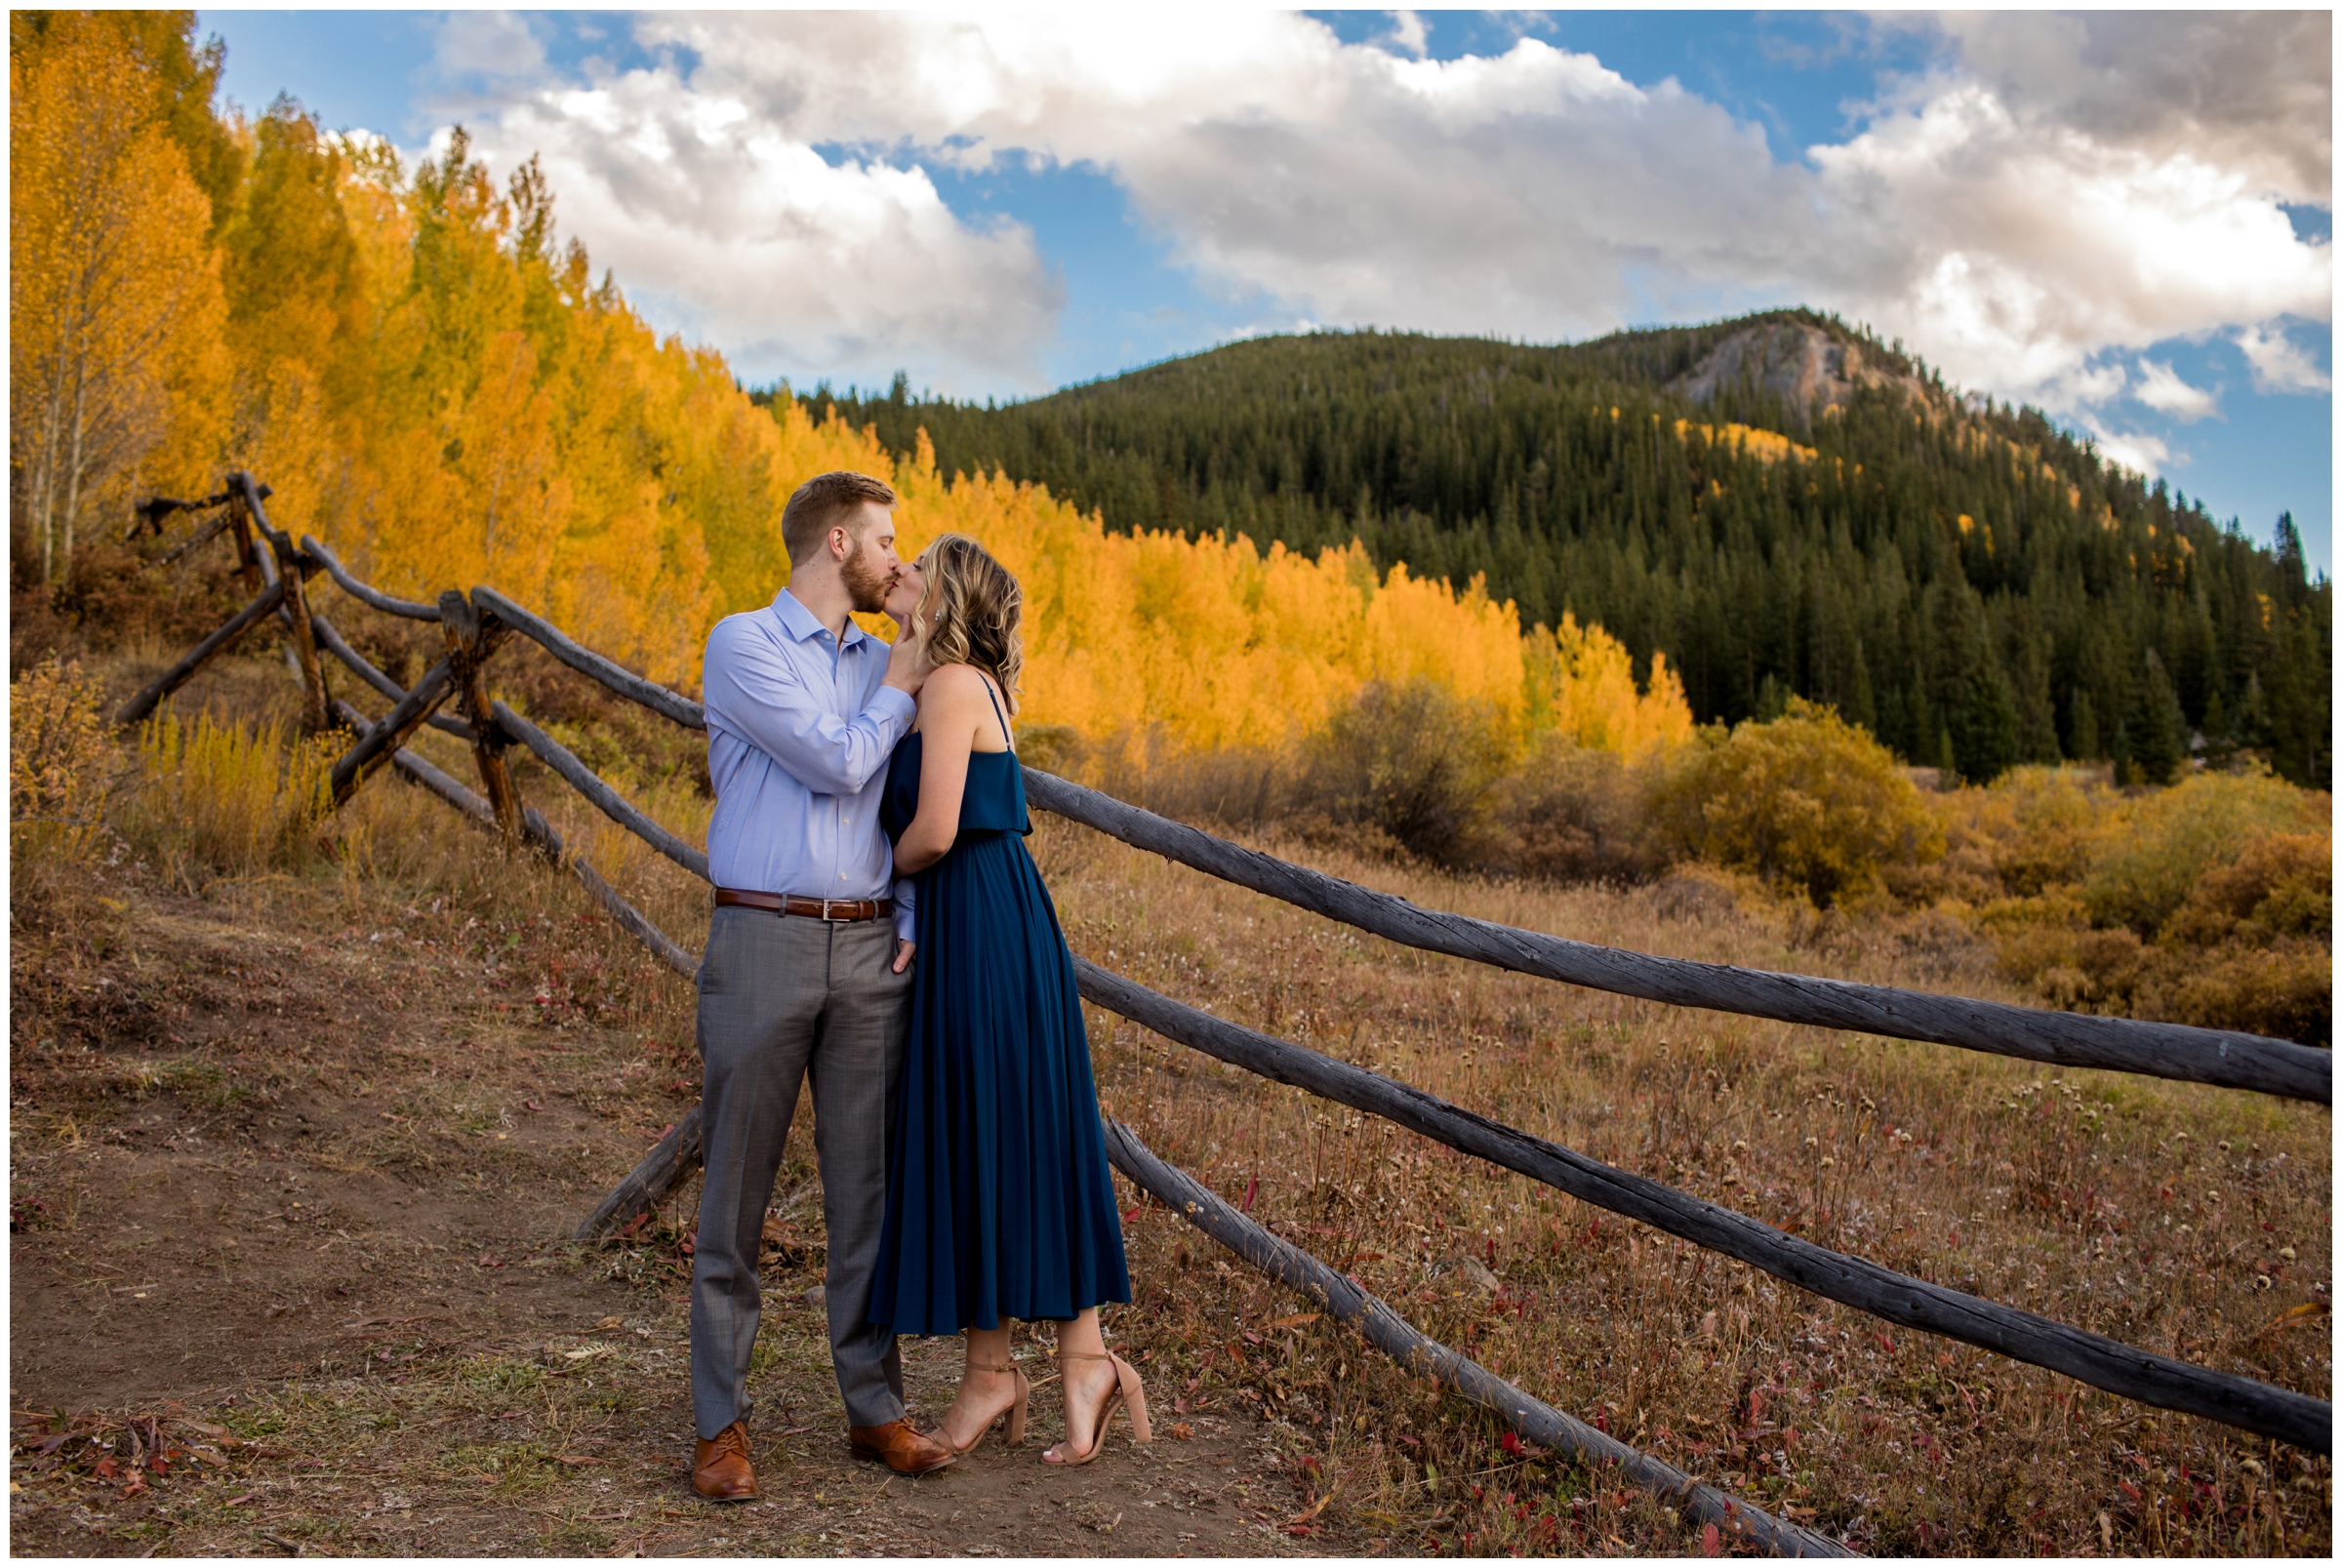 Breckenridge engagement photography session at Sawmill Museum by Colorado mountain photographer Plum Pretty Photographer